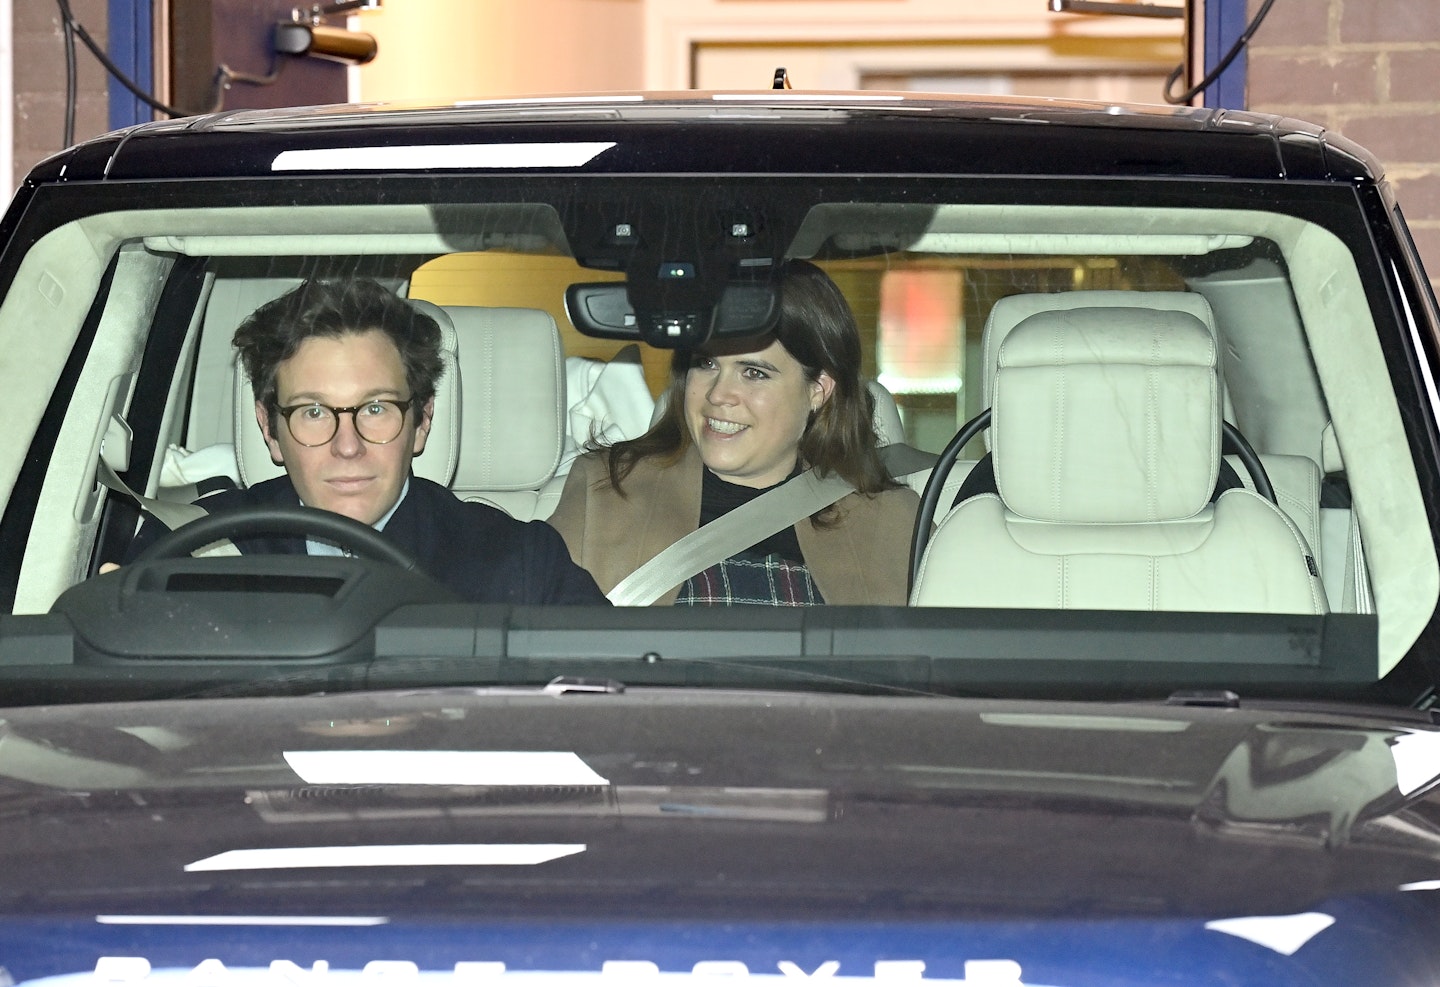 Princess Eugenie leaving hospital after giving birth